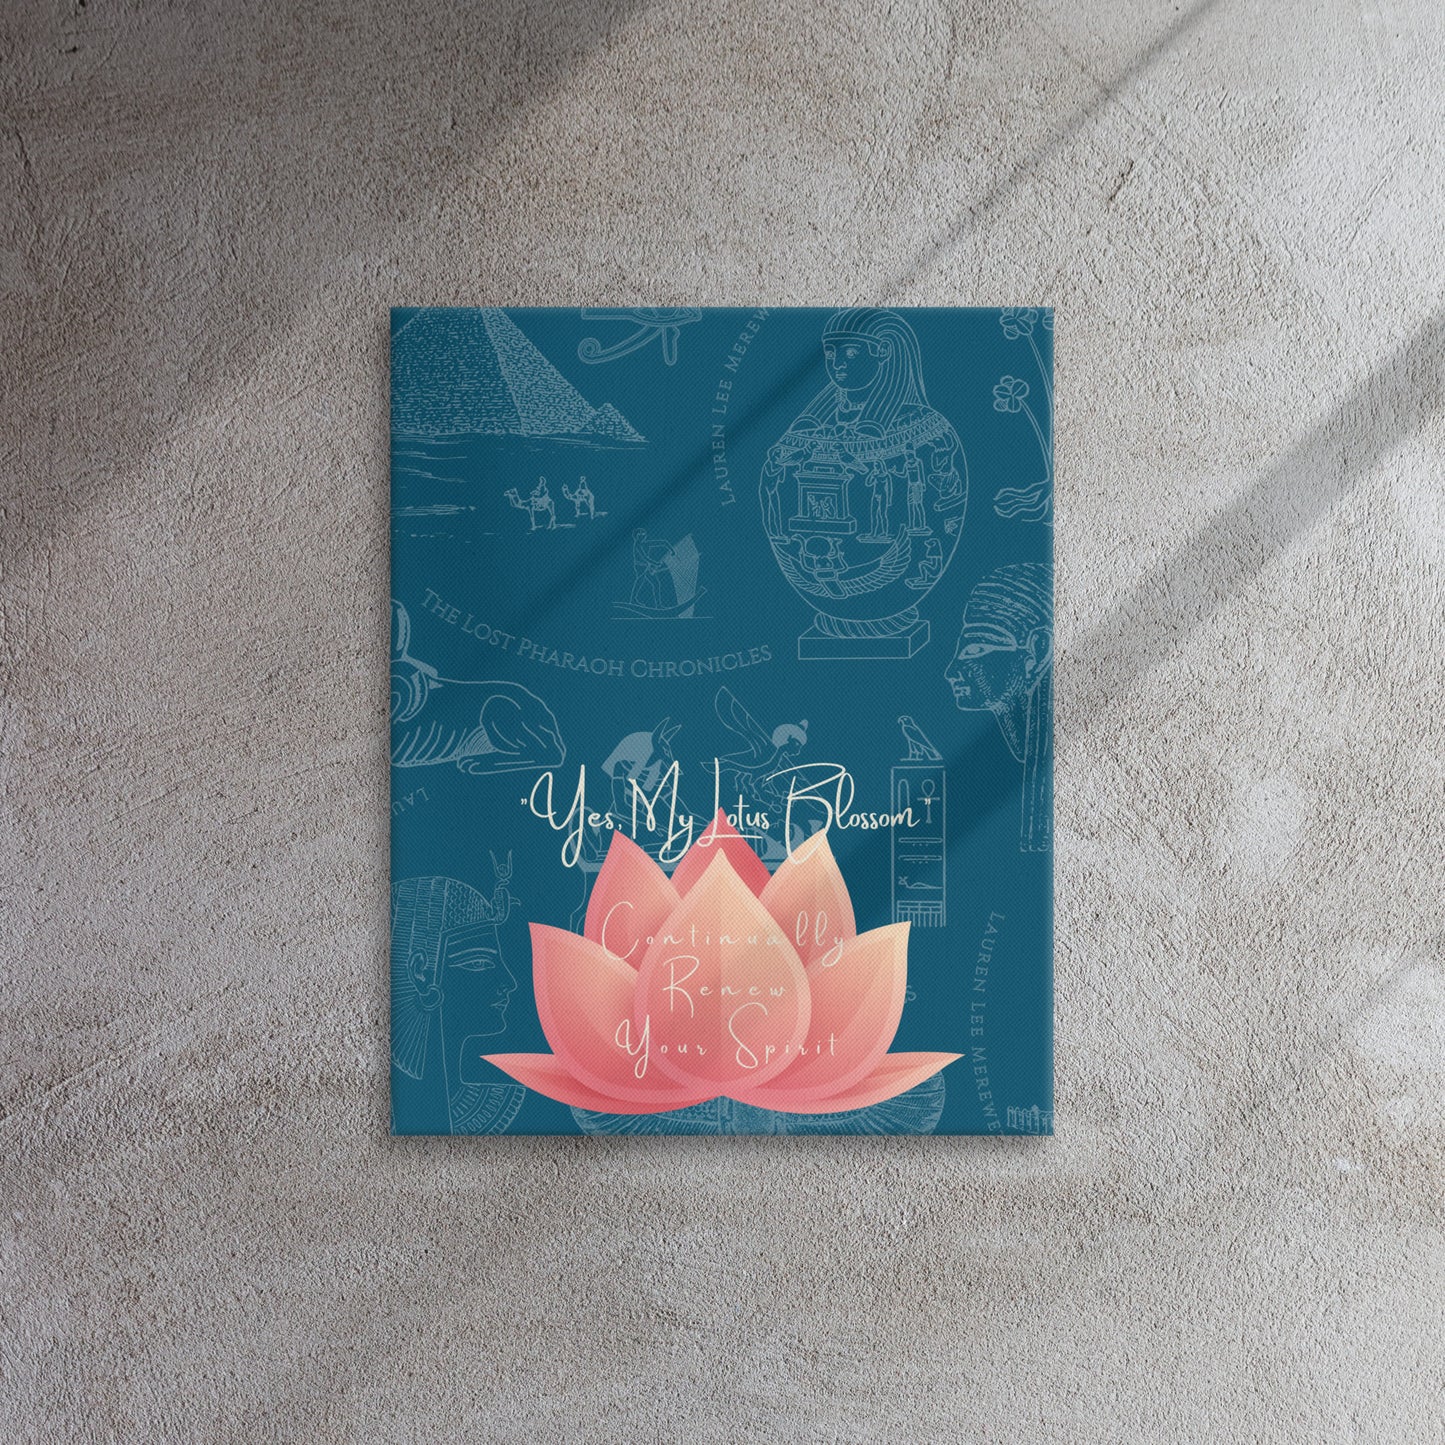 "Yes My Lotus Blossom Renew Your Spirit" Thin canvas